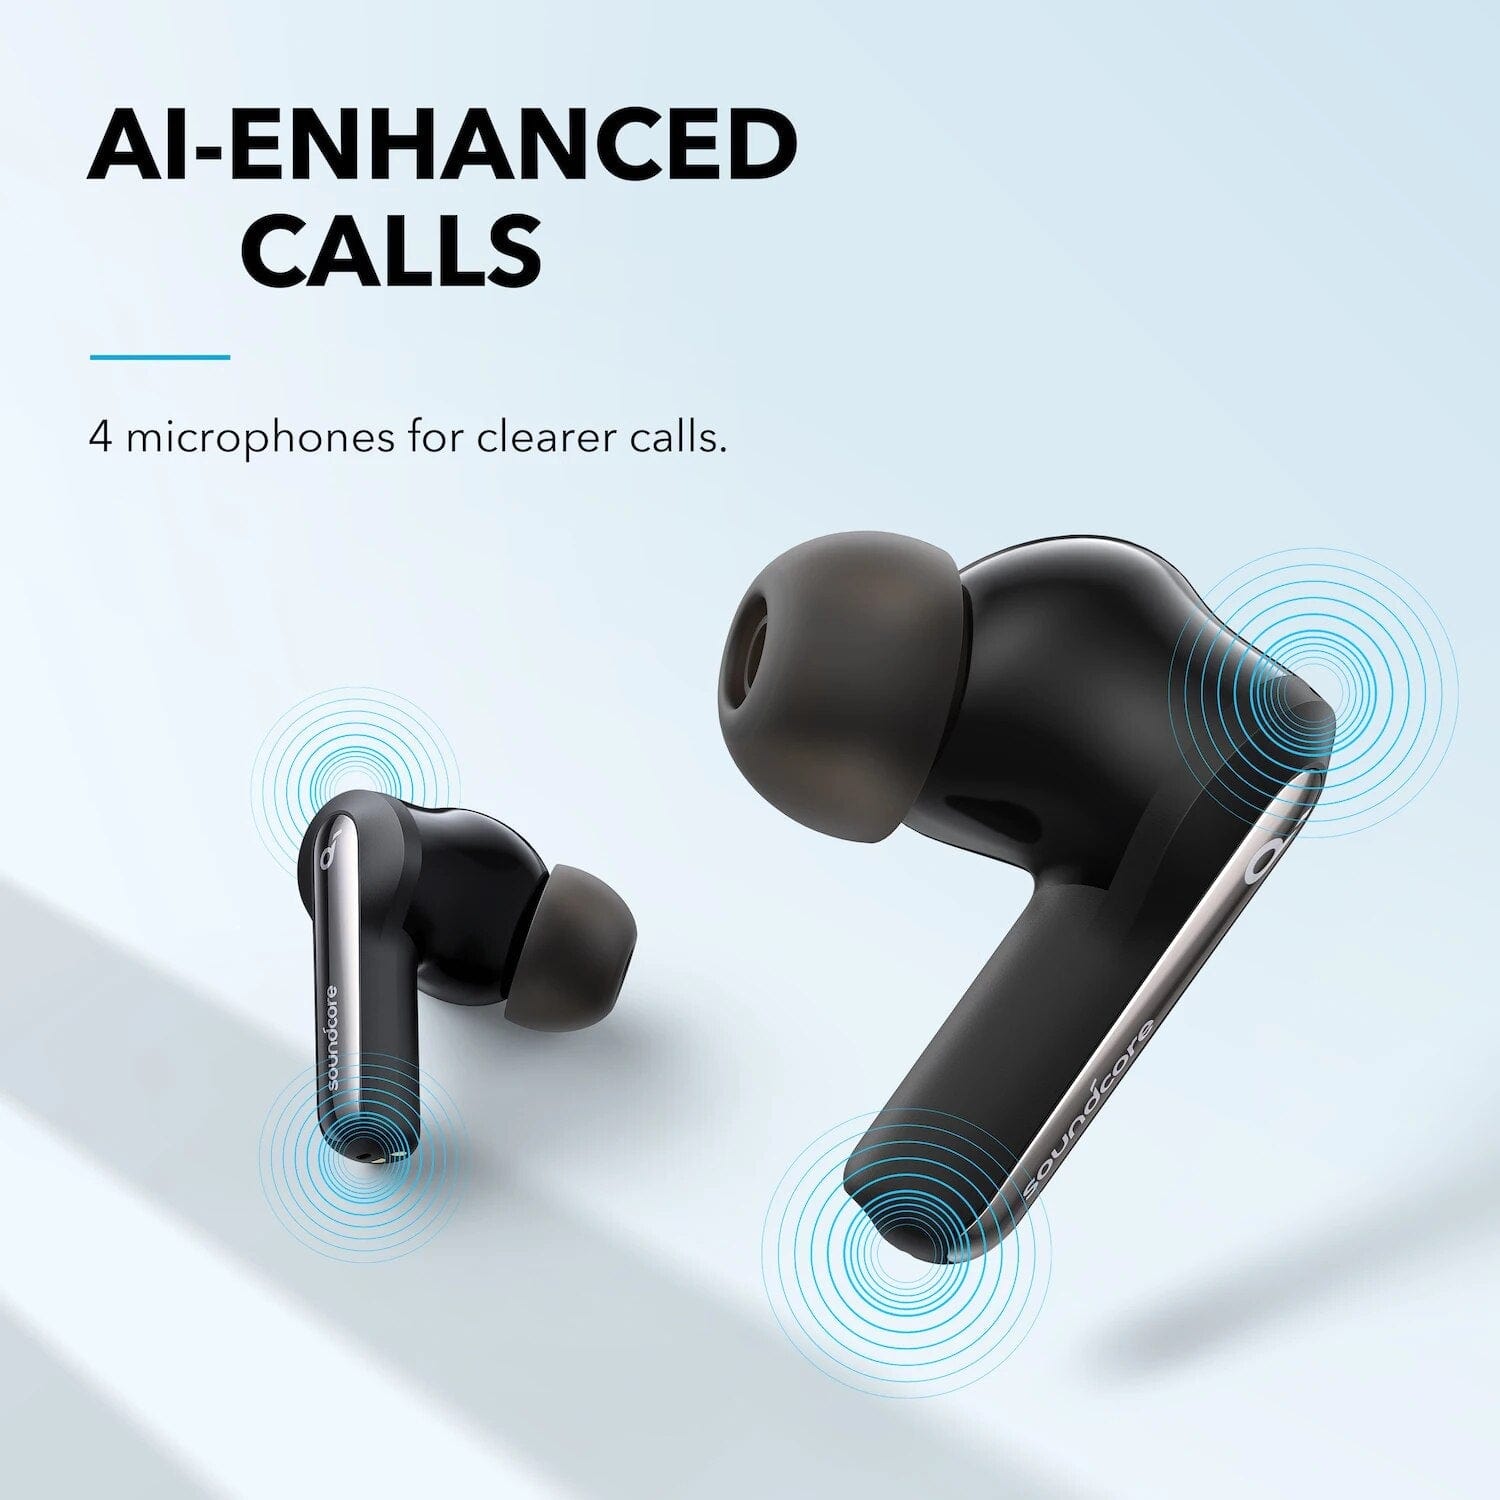 Soundcore China Soundcore, Wireless Earbuds, Version Life P3i, Supports Bluetooth 5.1, Playtime up to 36 Hours, Color Black